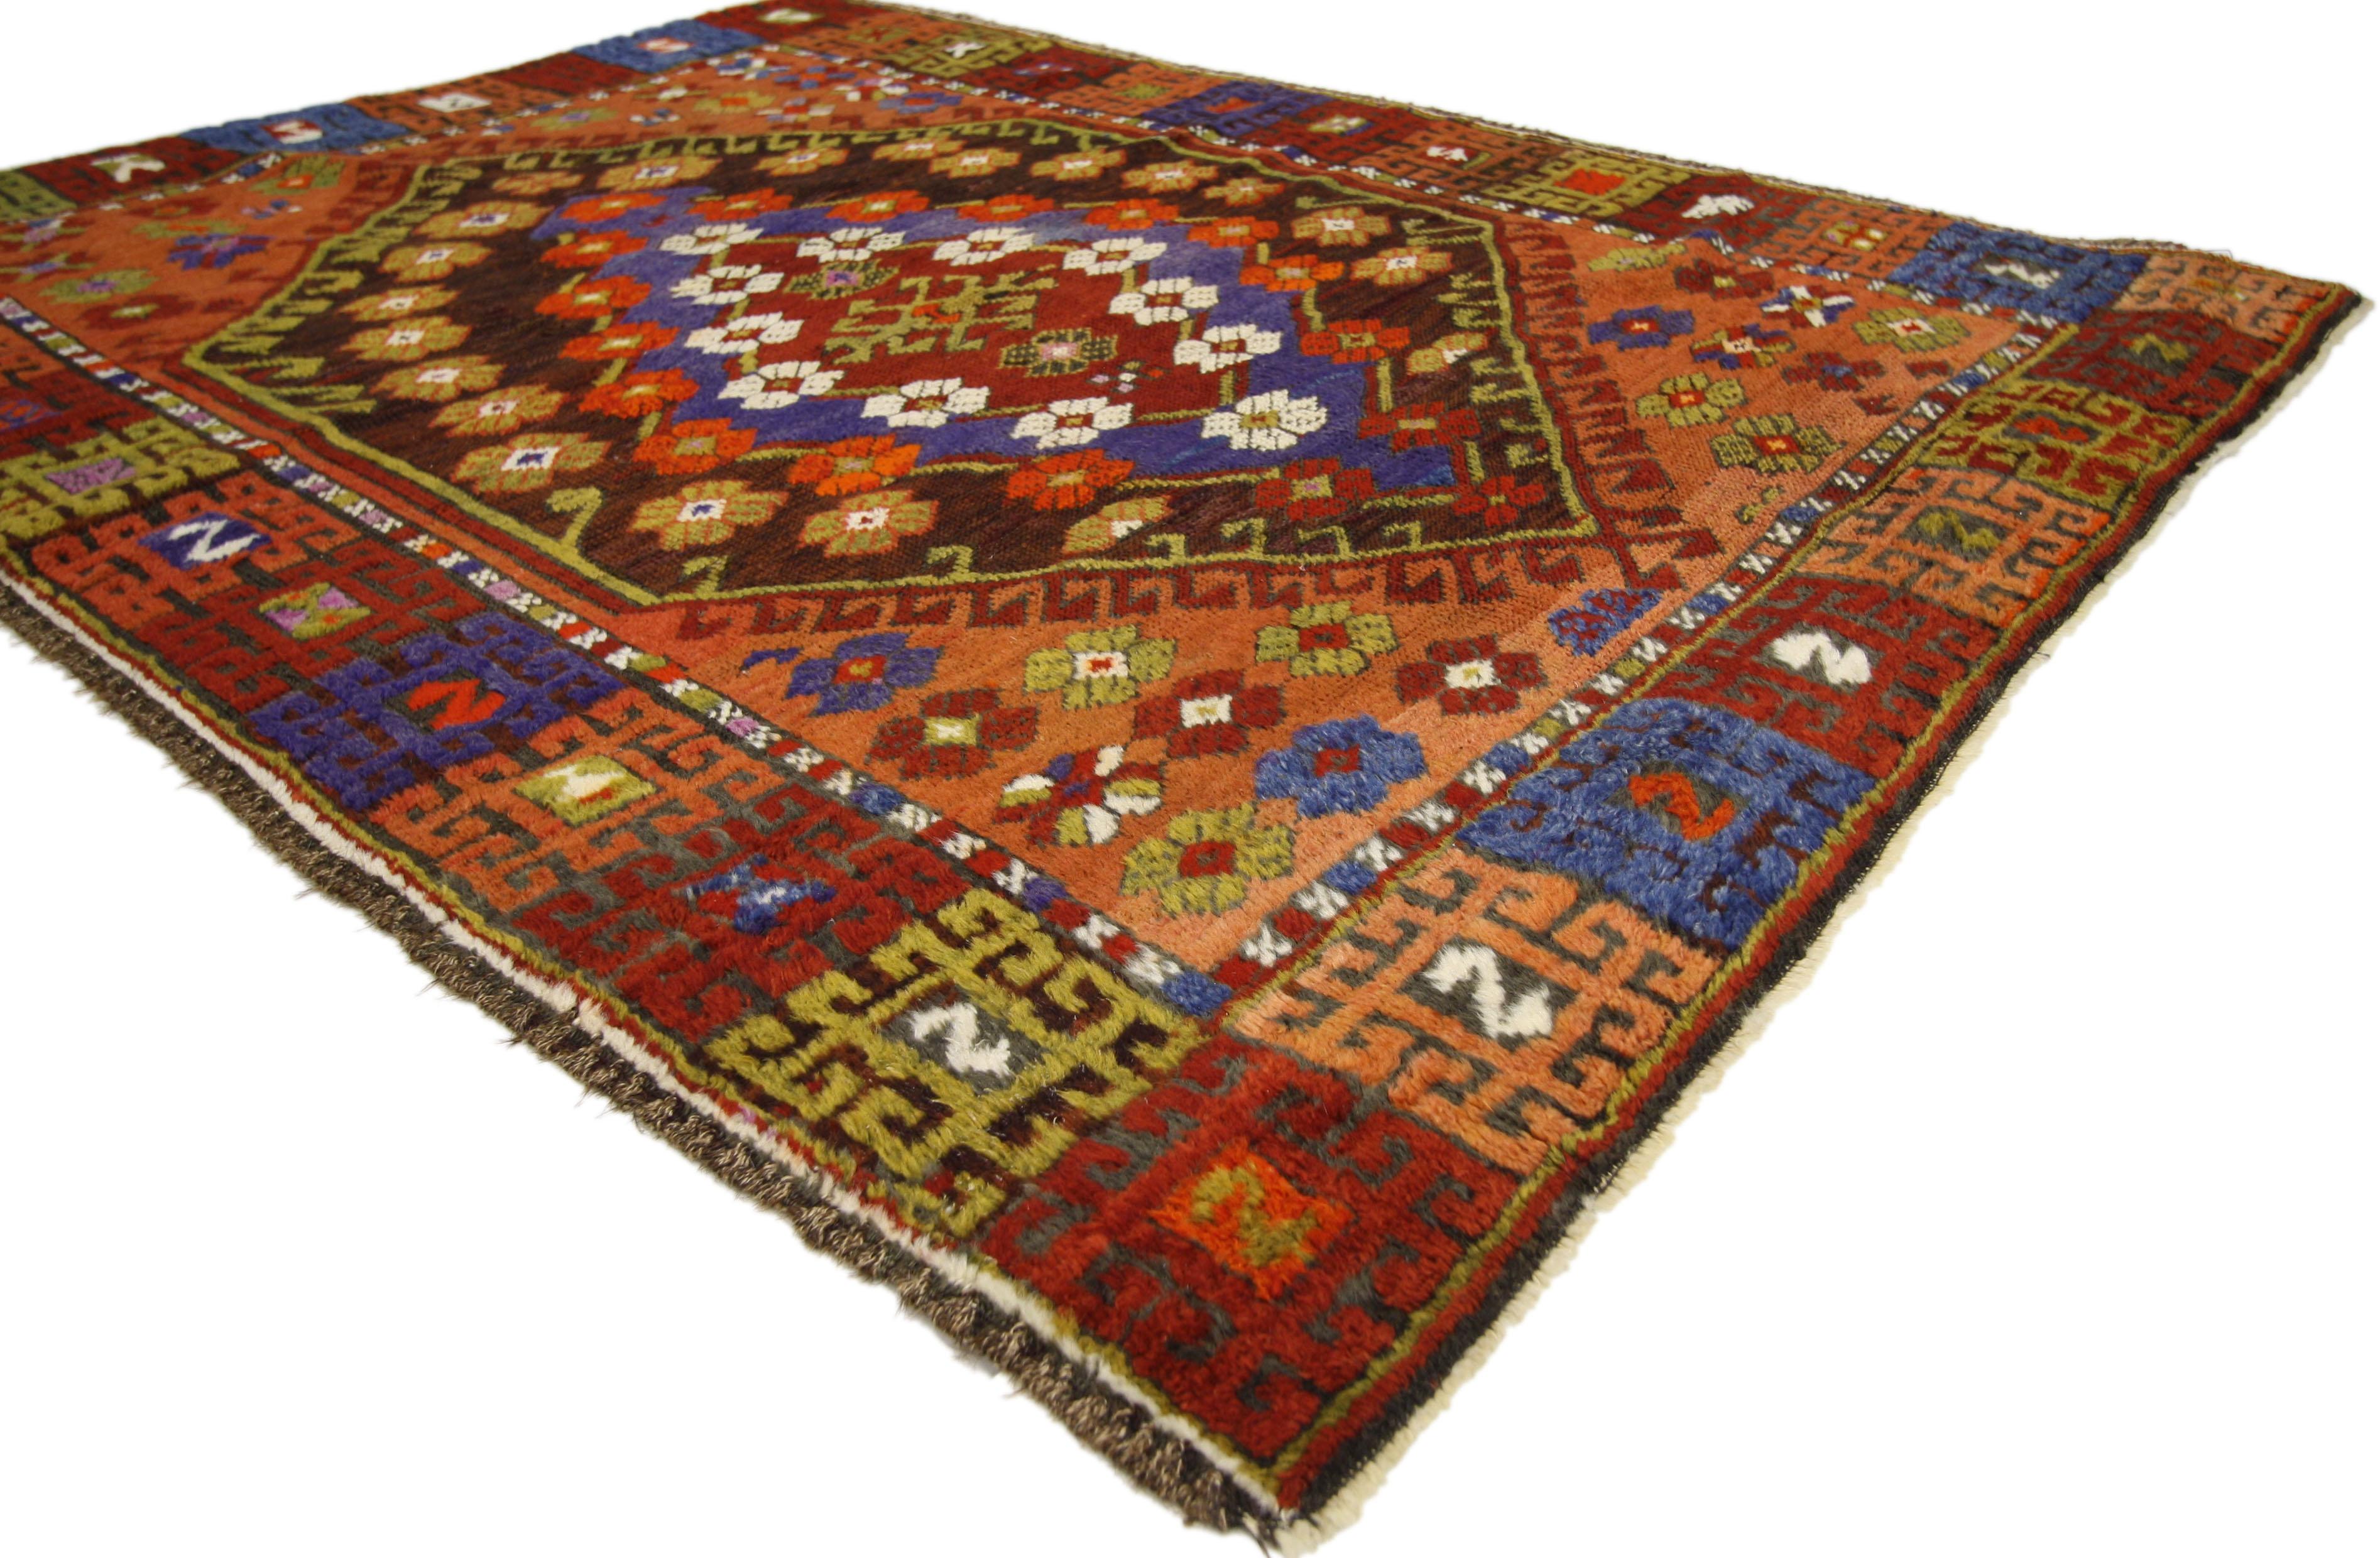 51733, vintage Turkish Oushak accent rug, Entry or Foyer rug. From casual elegance to fresh and formal, relish the refinement as this vintage Turkish Oushak rug features a modern style. Its bold colors evoke an air of warmth and comfort with a